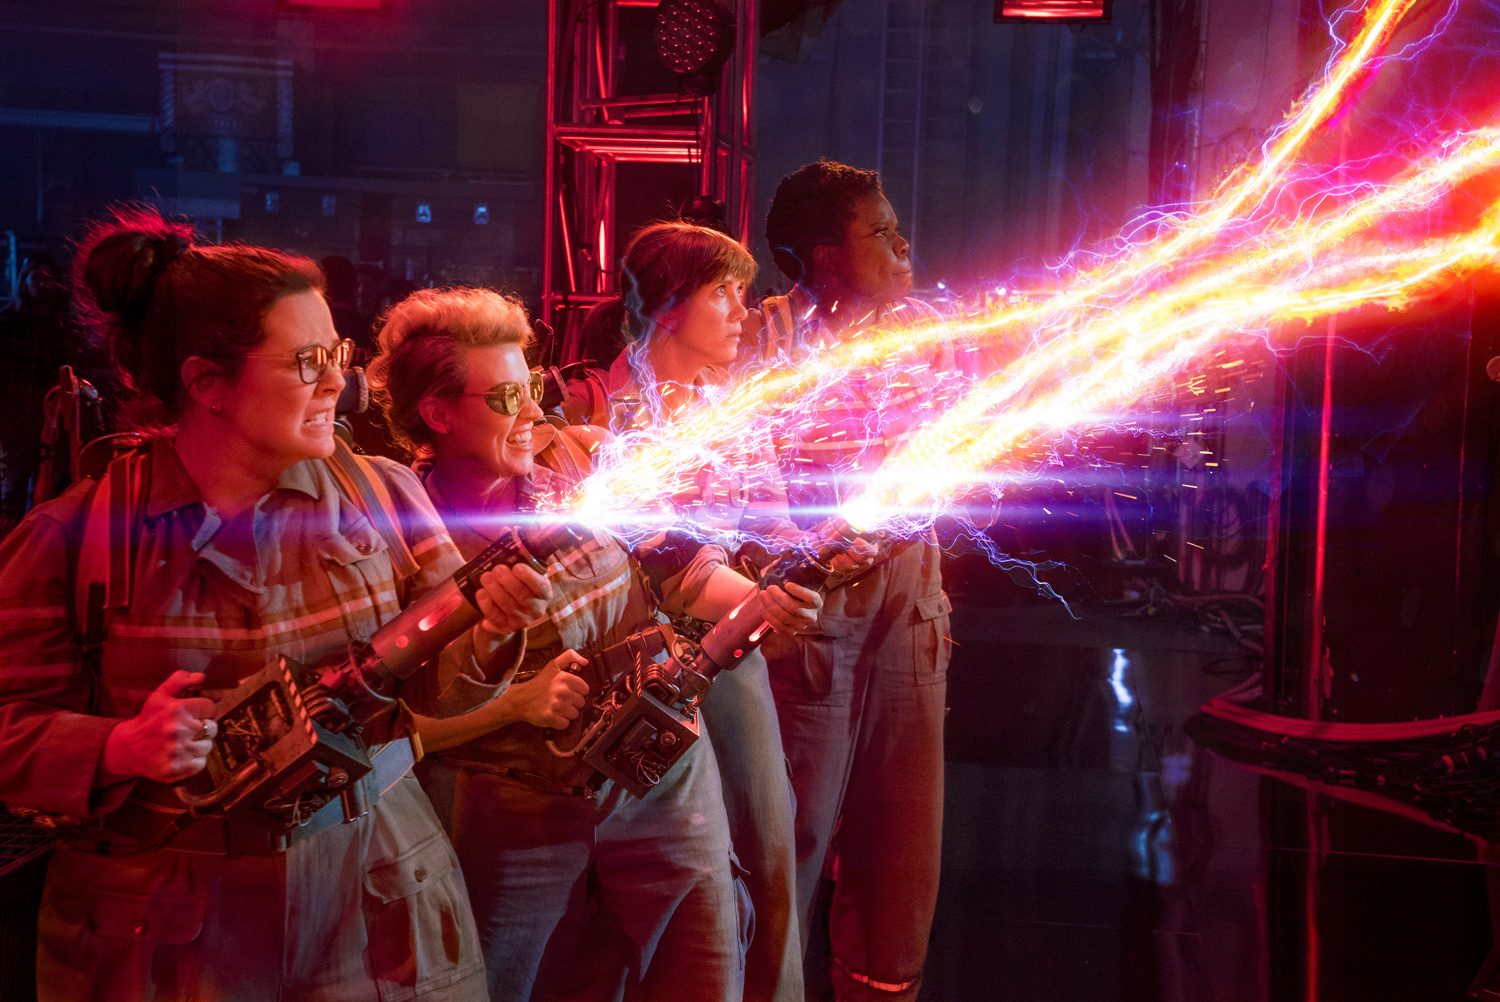 ‘Ghostbusters’ Review: A rewarding reboot